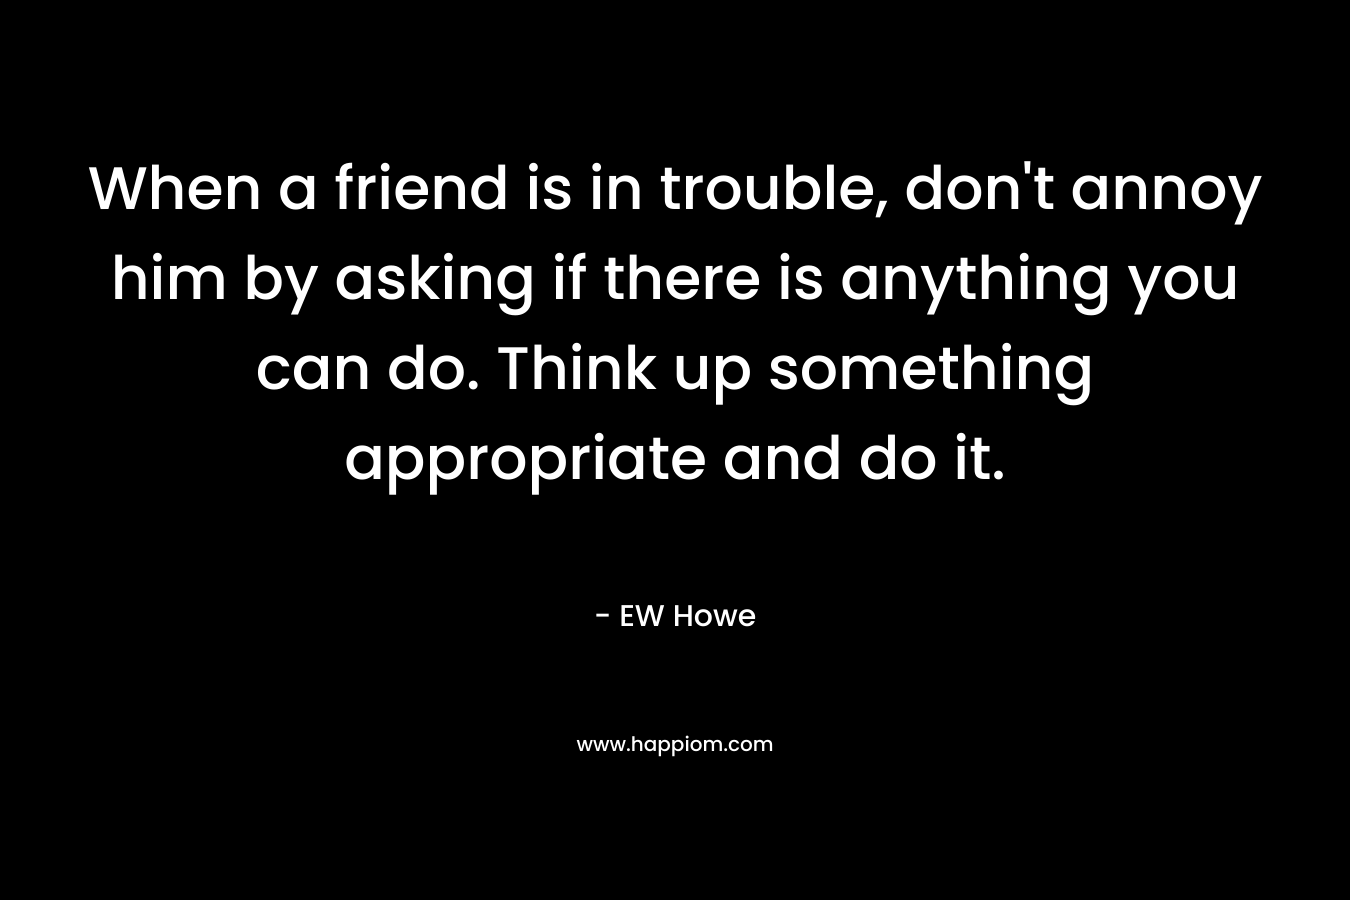 When a friend is in trouble, don’t annoy him by asking if there is anything you can do. Think up something appropriate and do it. – EW Howe